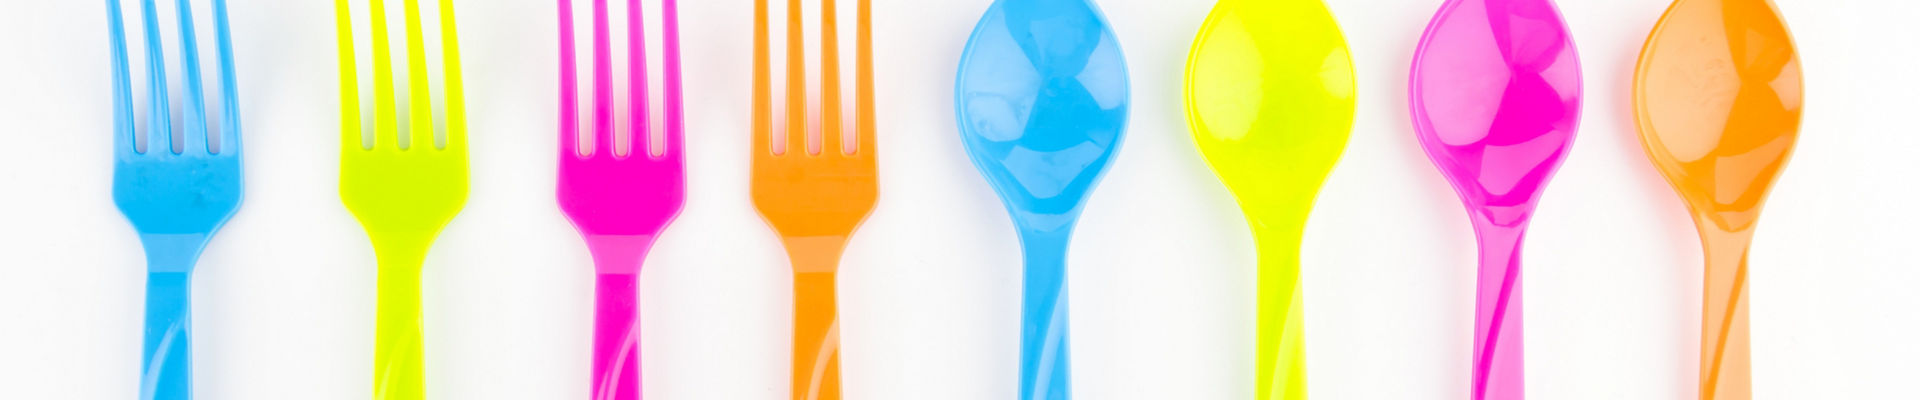 Row of neon-colored spoons and forks laid out on a white background 